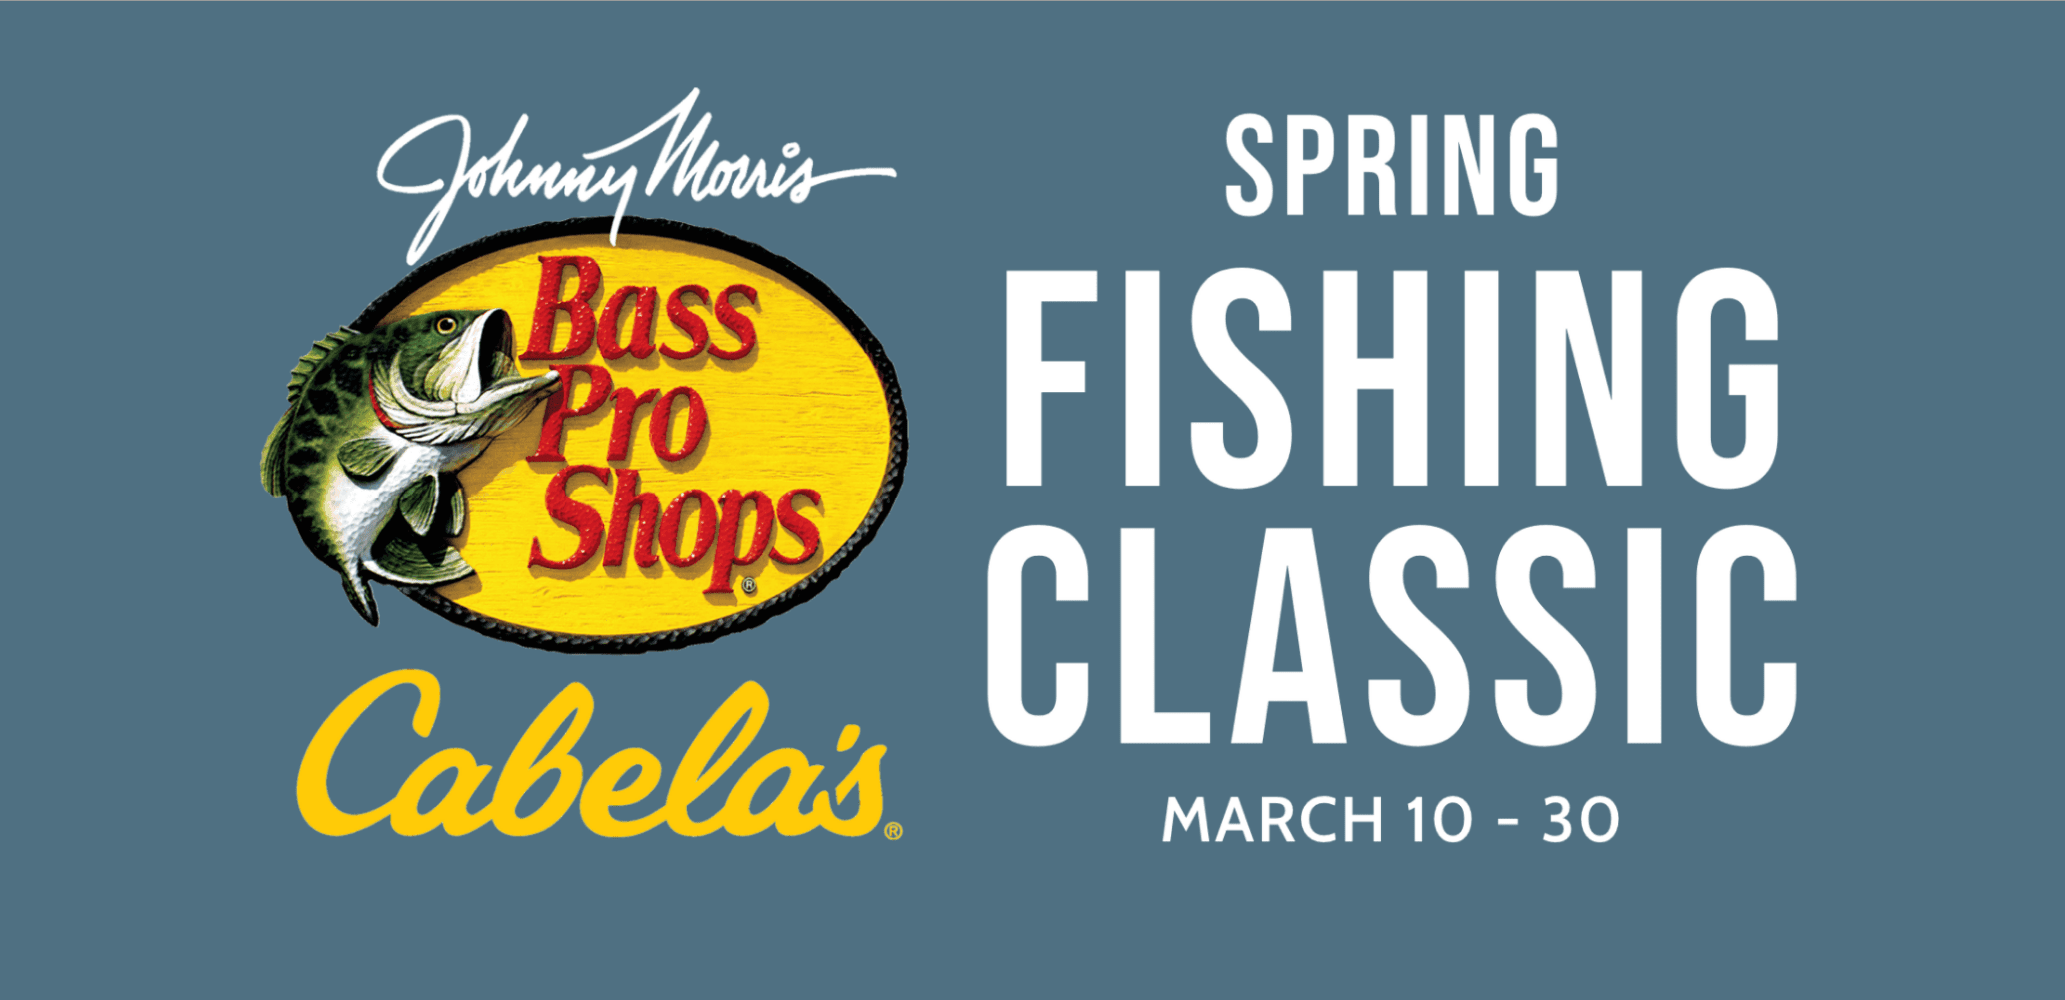 Bass Pro Shops and Cabela’s Spring Fishing Classic Packed With Family Fun